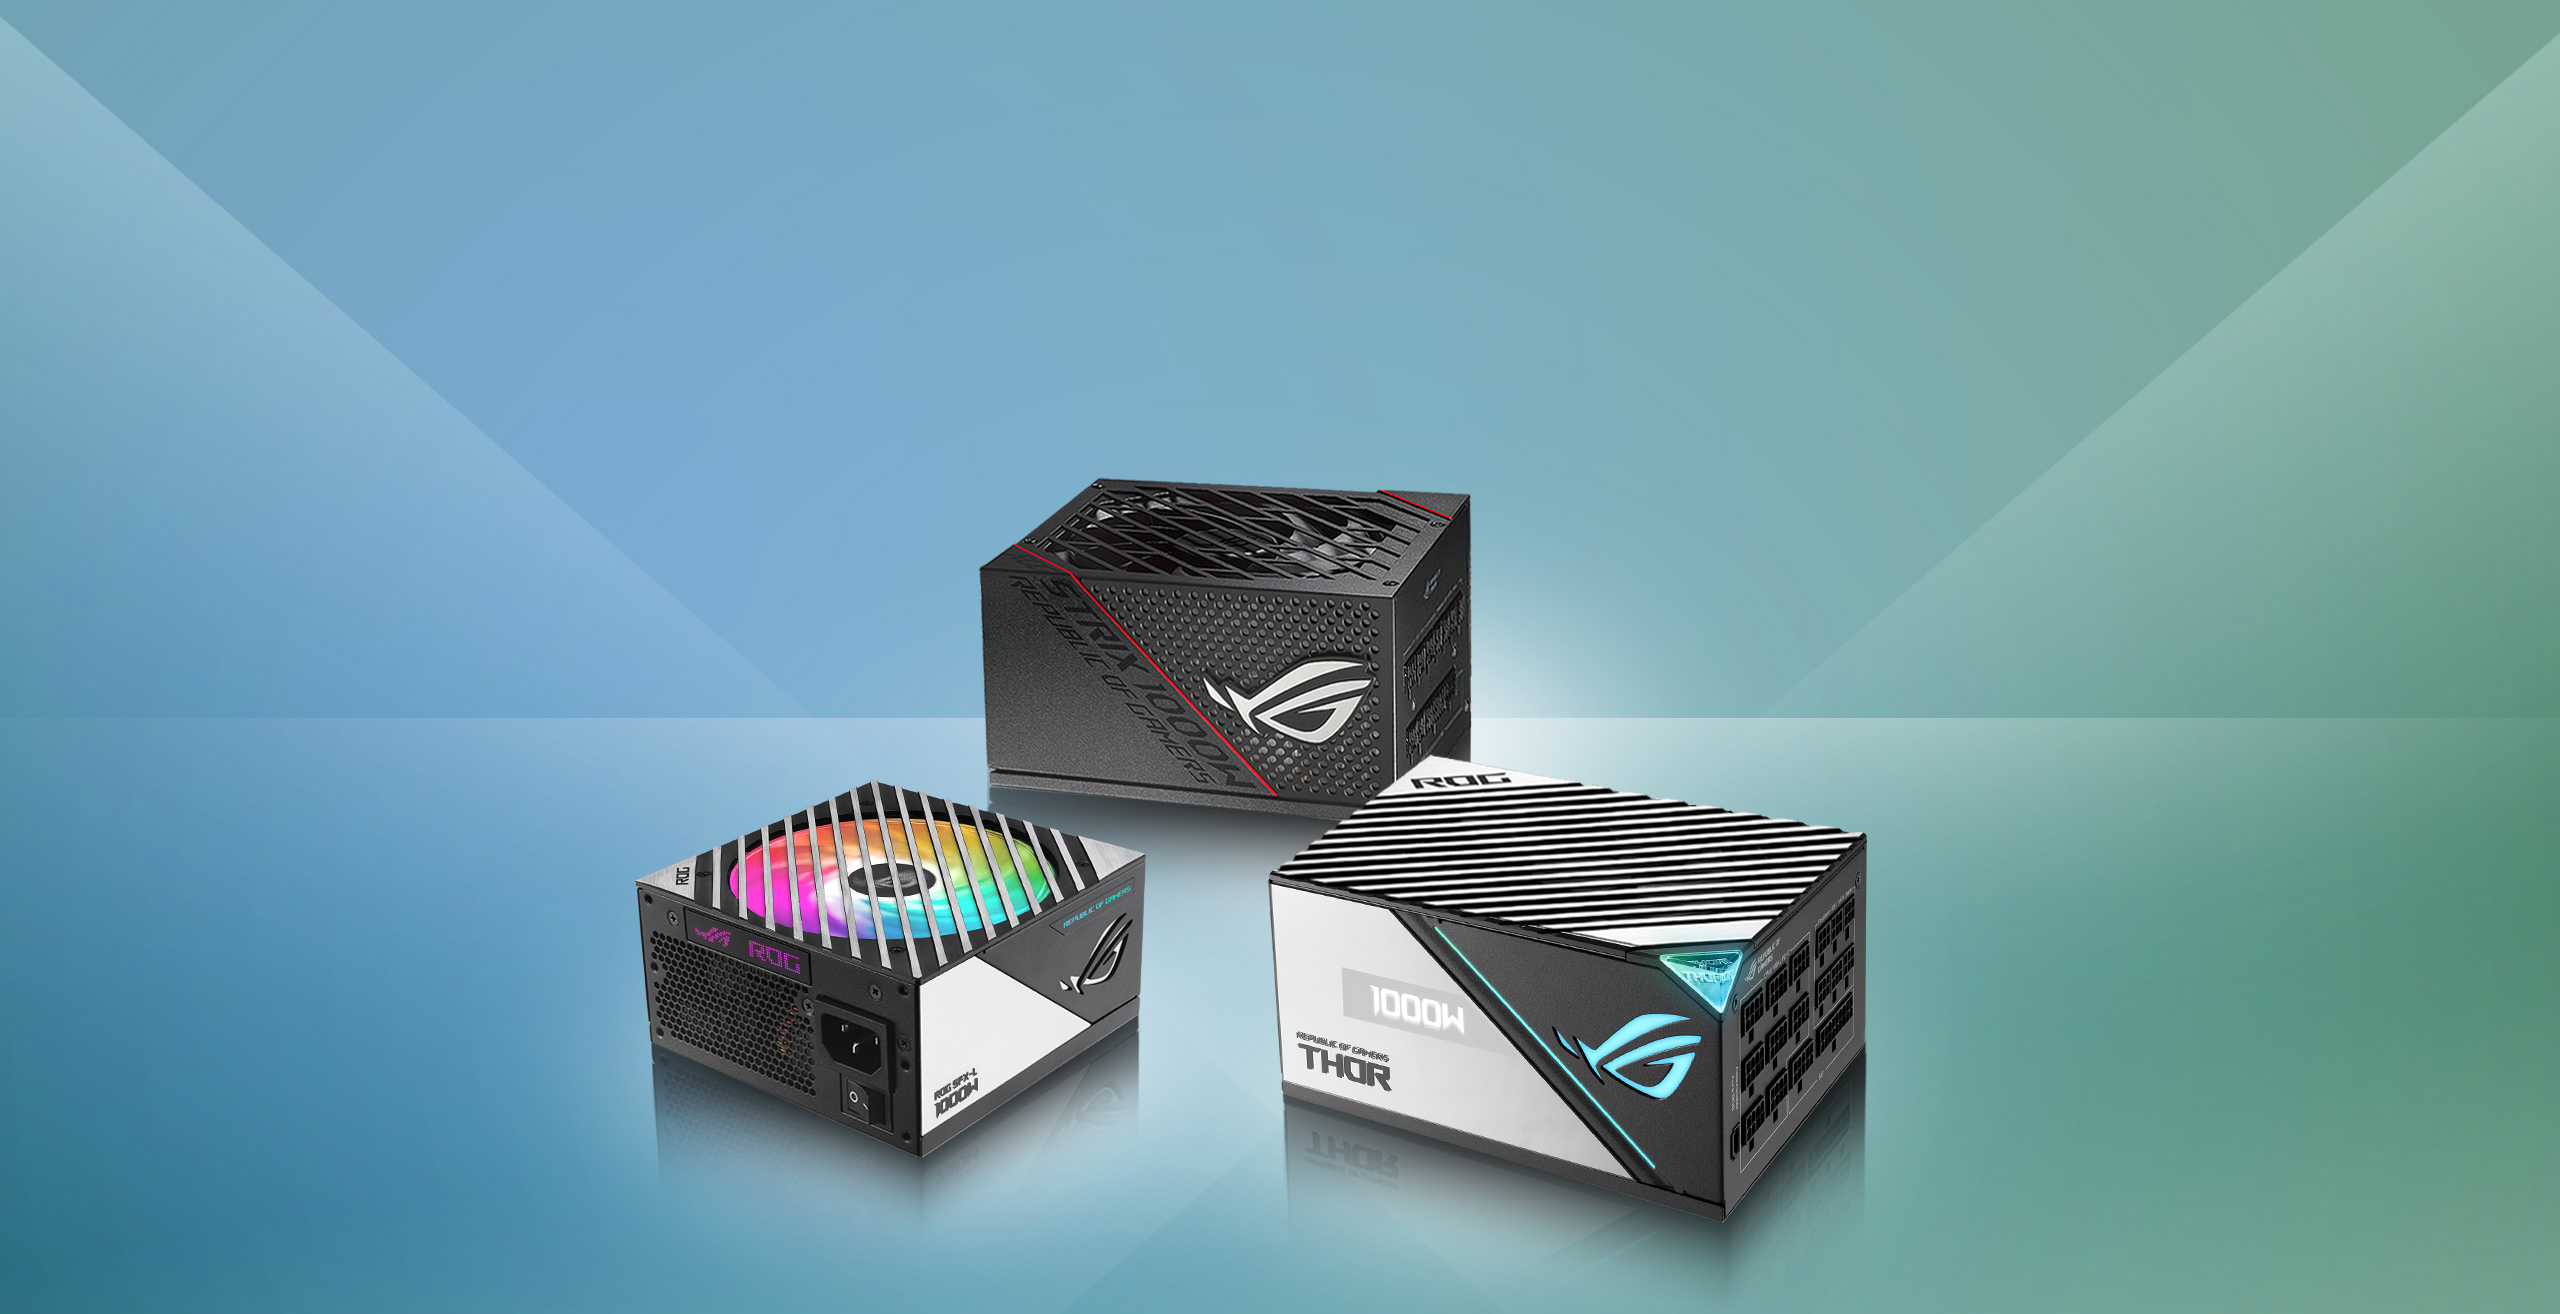 Best-in-class power supplies to fuel your GeForce RTX 40 Series experience.